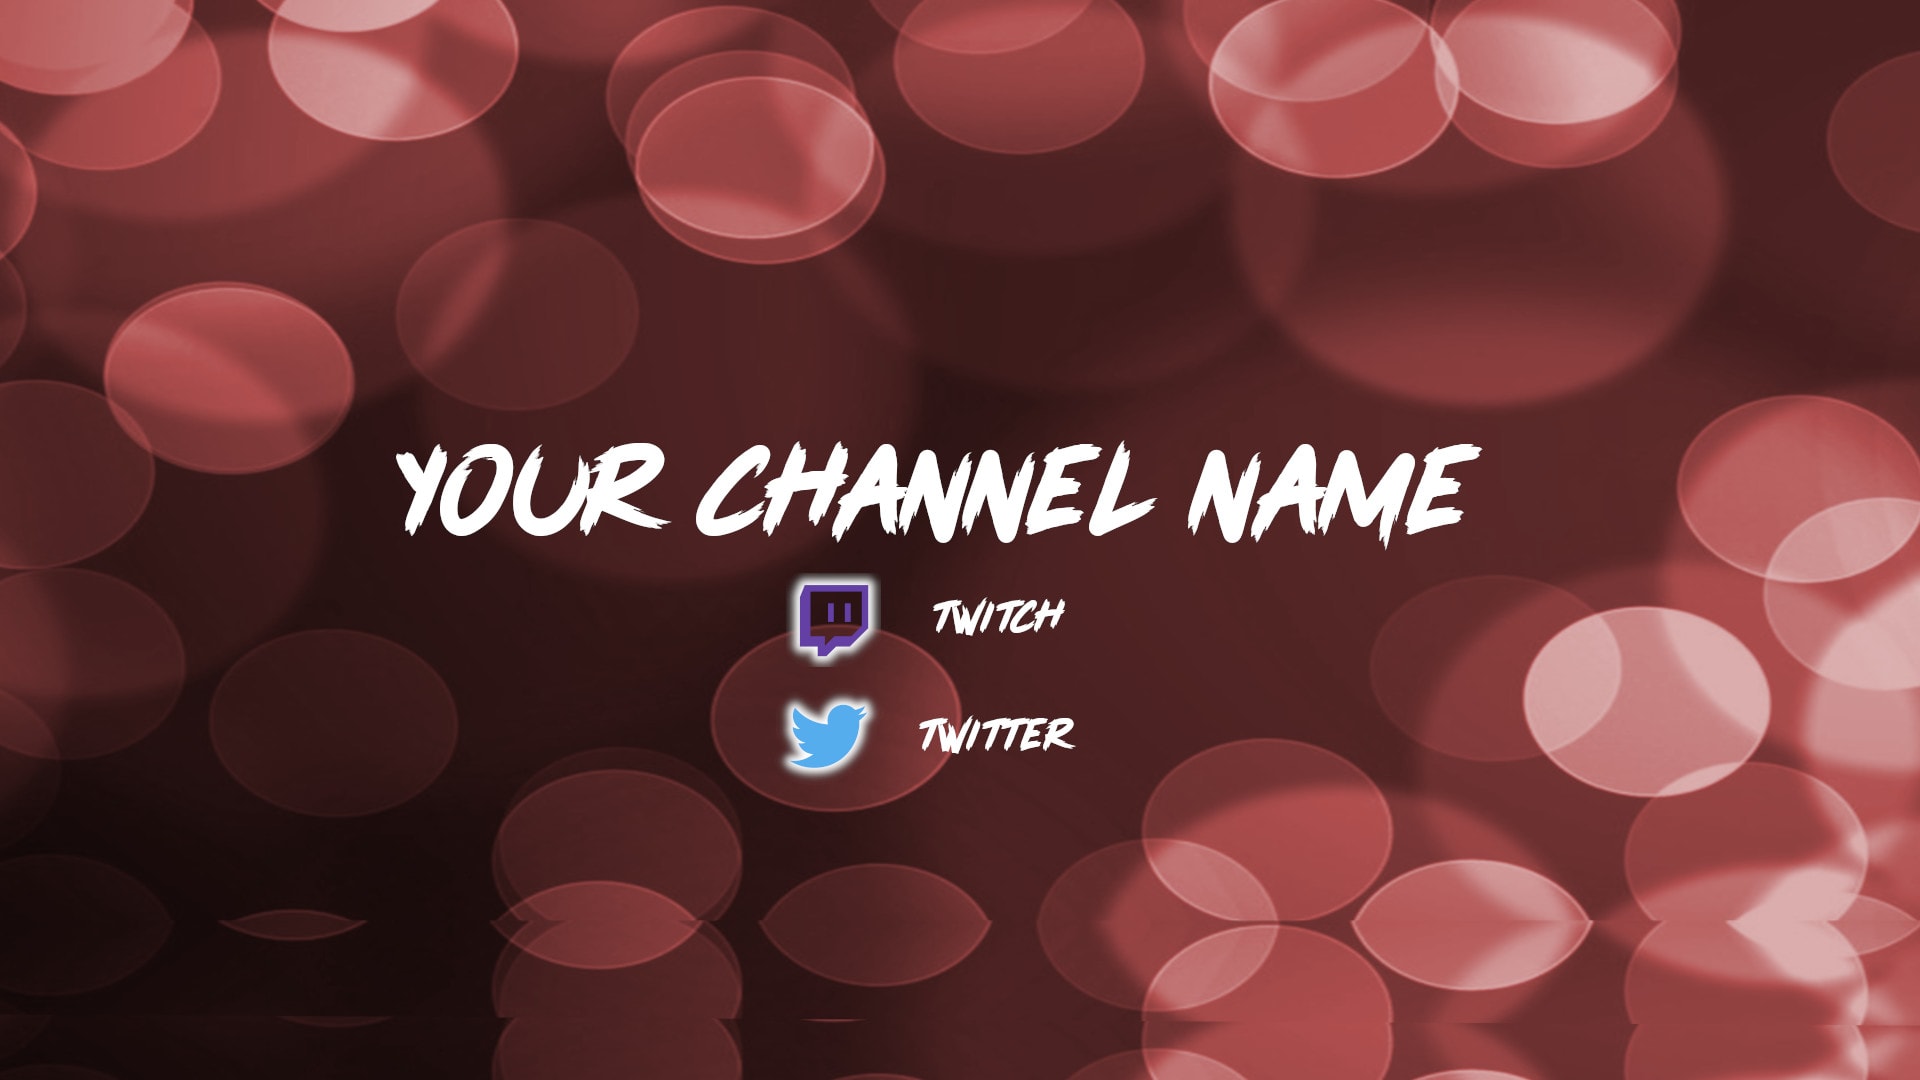 Make a youtube channel art banner by Mris_0219 | Fiverr